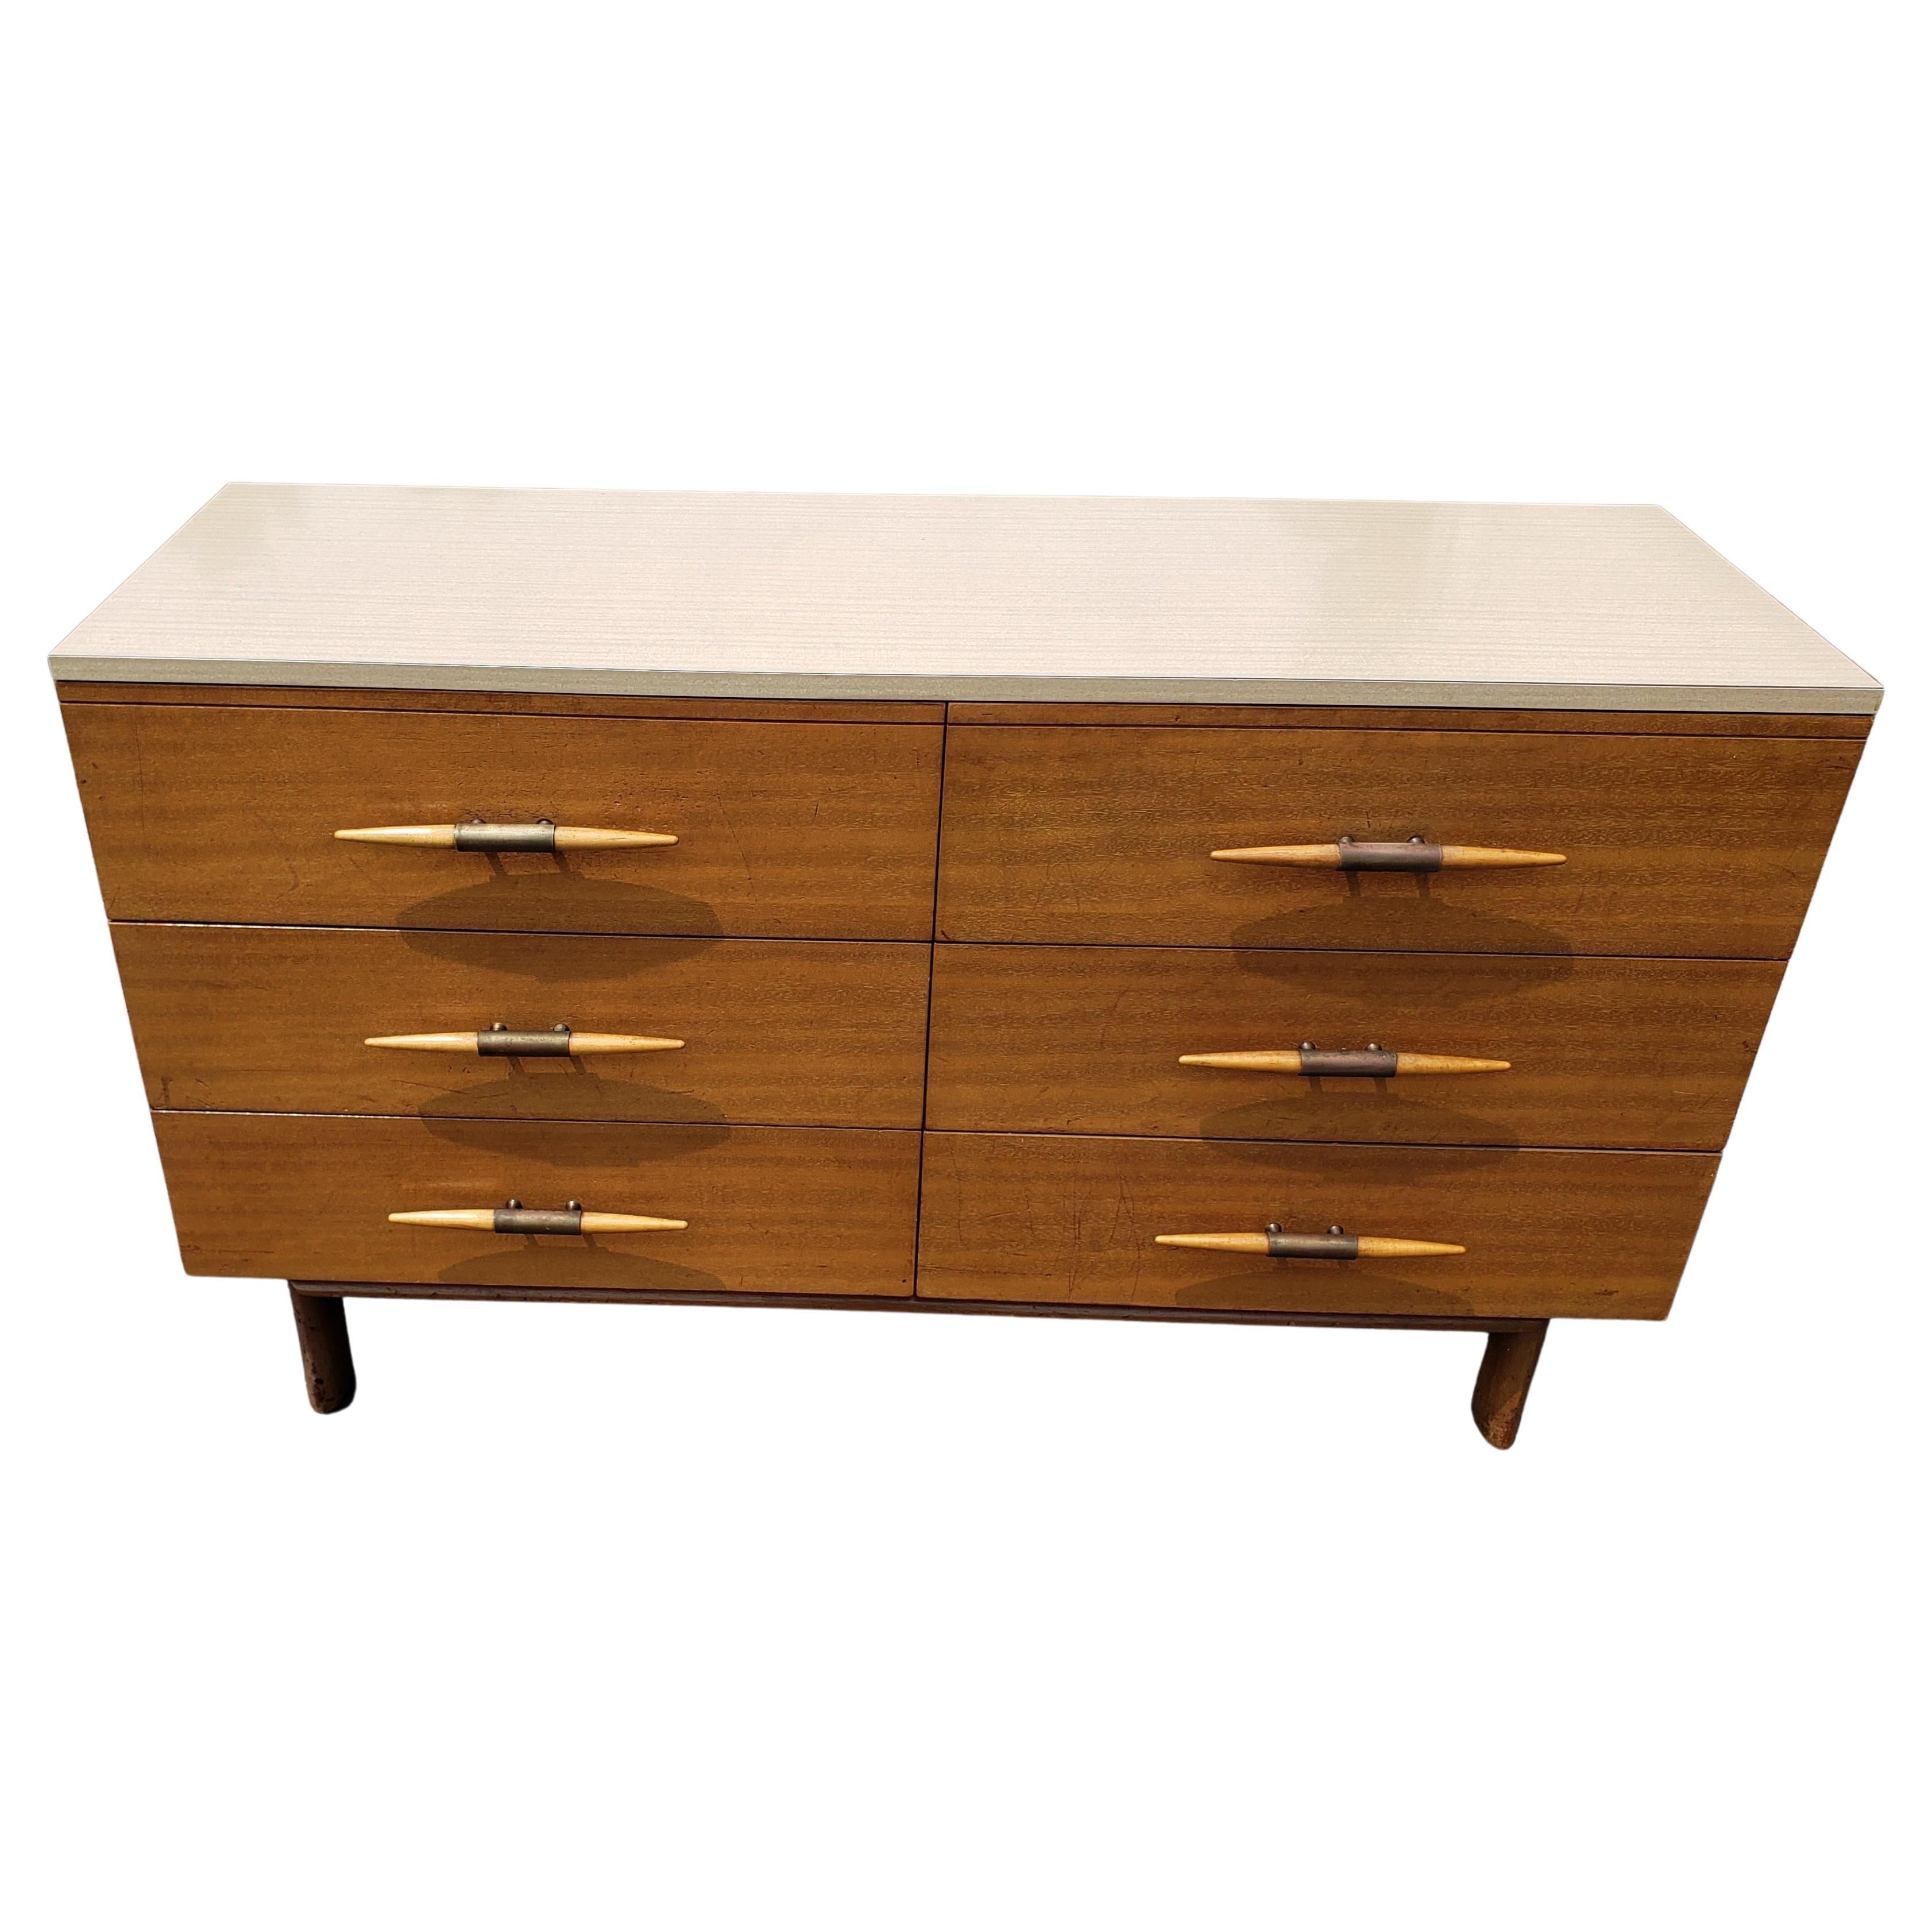 A clean midcentury Brown Saltman blonde mahogany modern double dresser 1950s USA. Blonde mahogany body and very clean formica top.
Exceptionally clean modern lines designed by John Keal. Maker label present.
Shows sculptural thick oval legs and